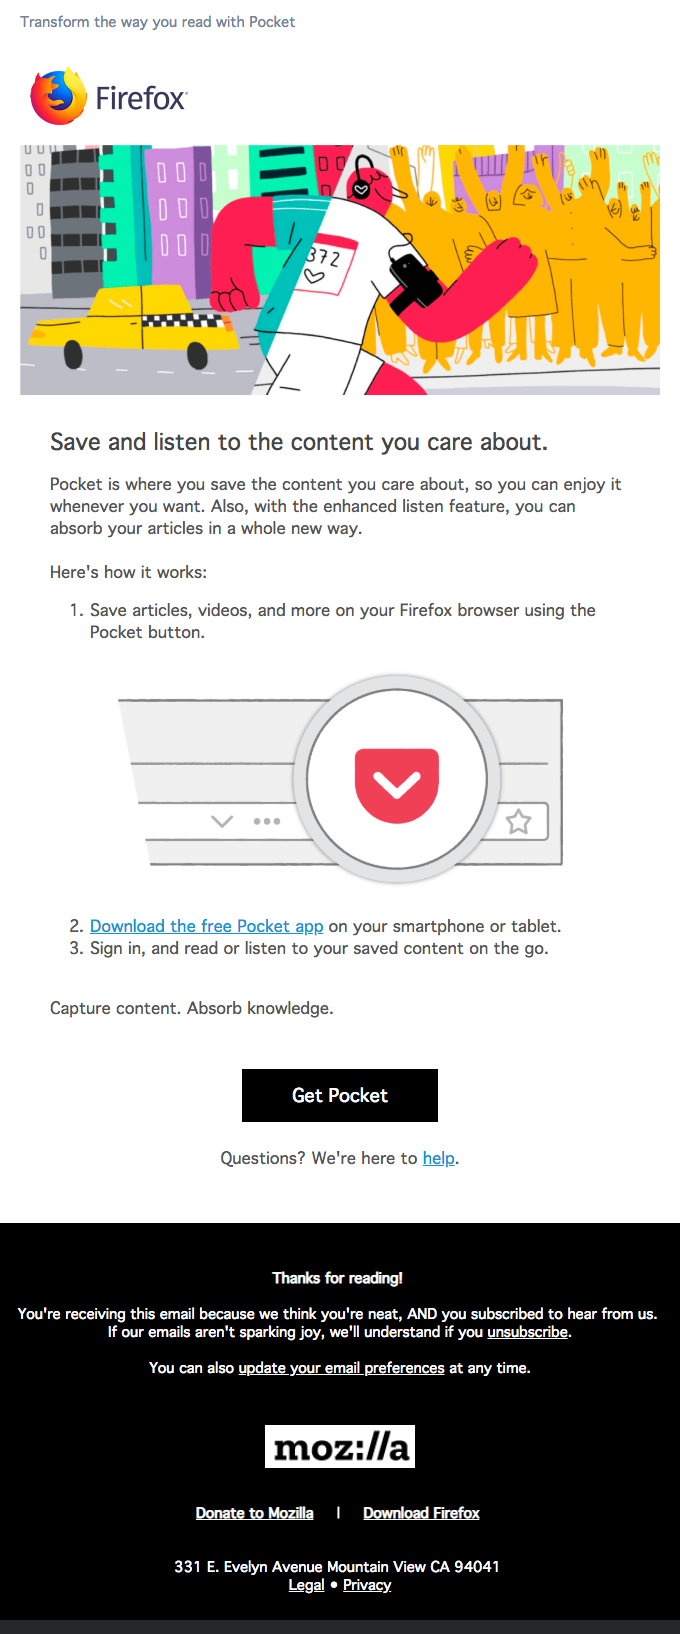 Listen or Read – It’s your choice with Pocket.